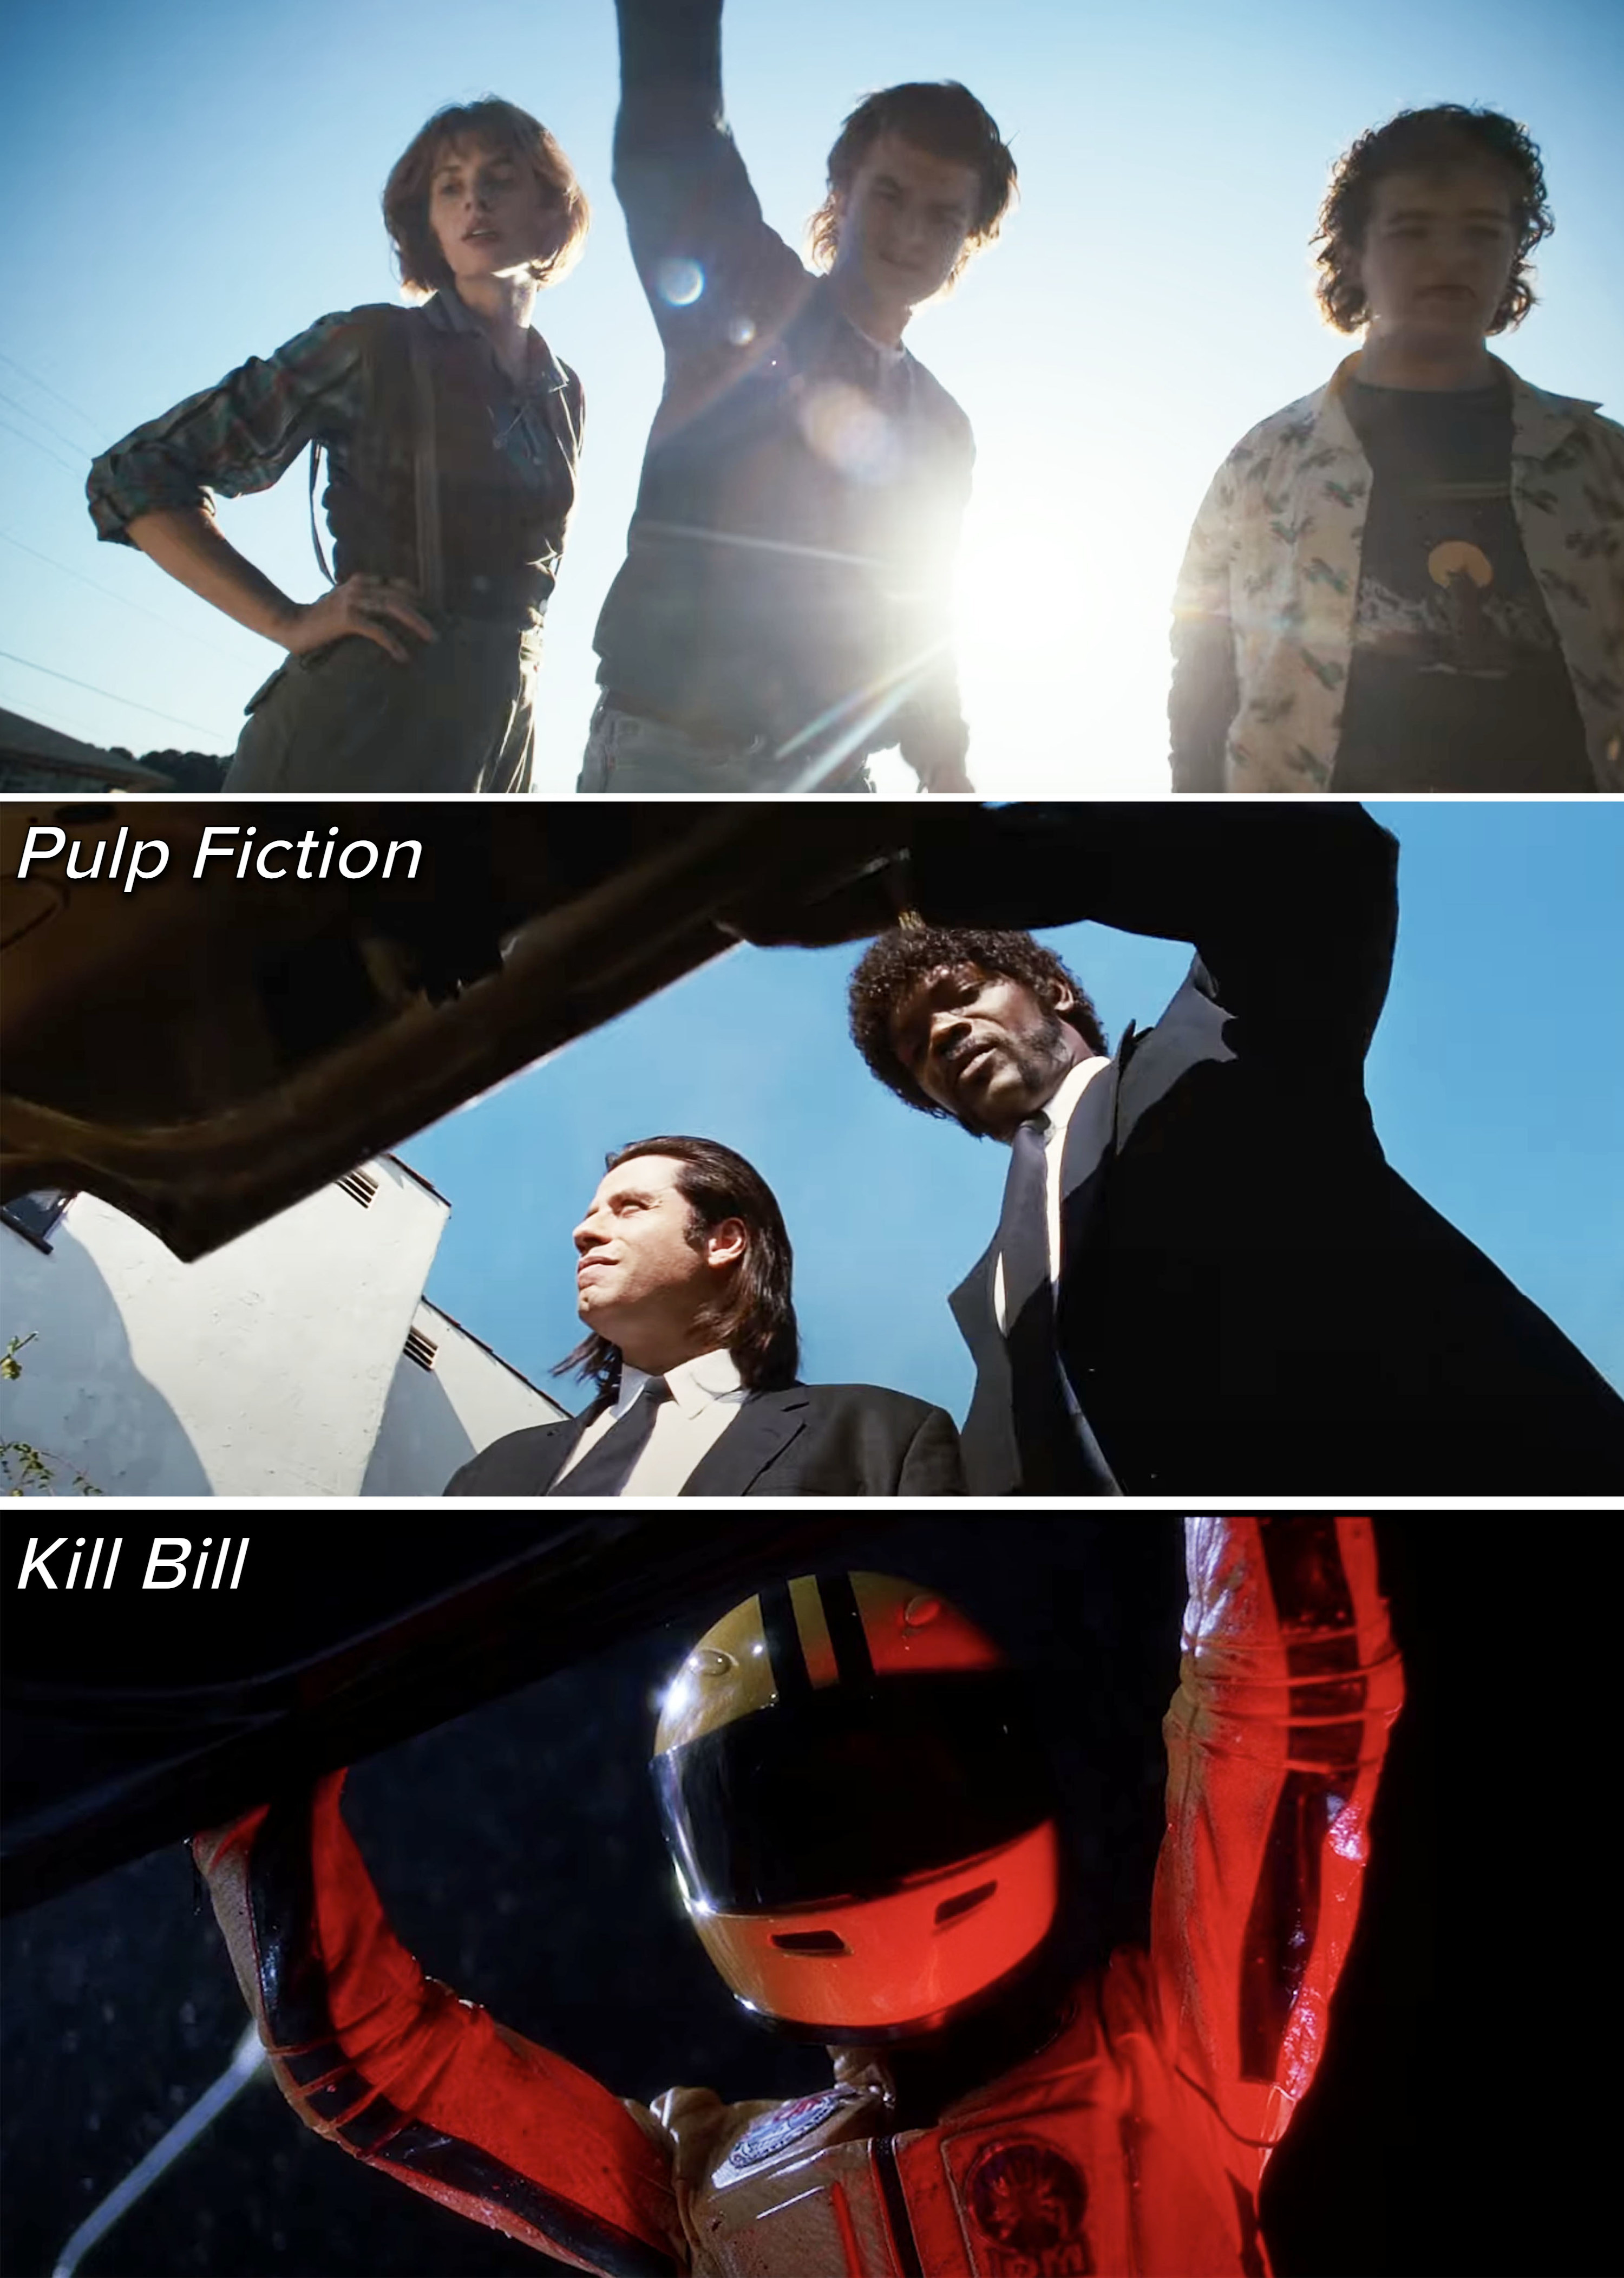 stranger things, pulp fiction, and kill bill shots with the camera pointing up at the characters